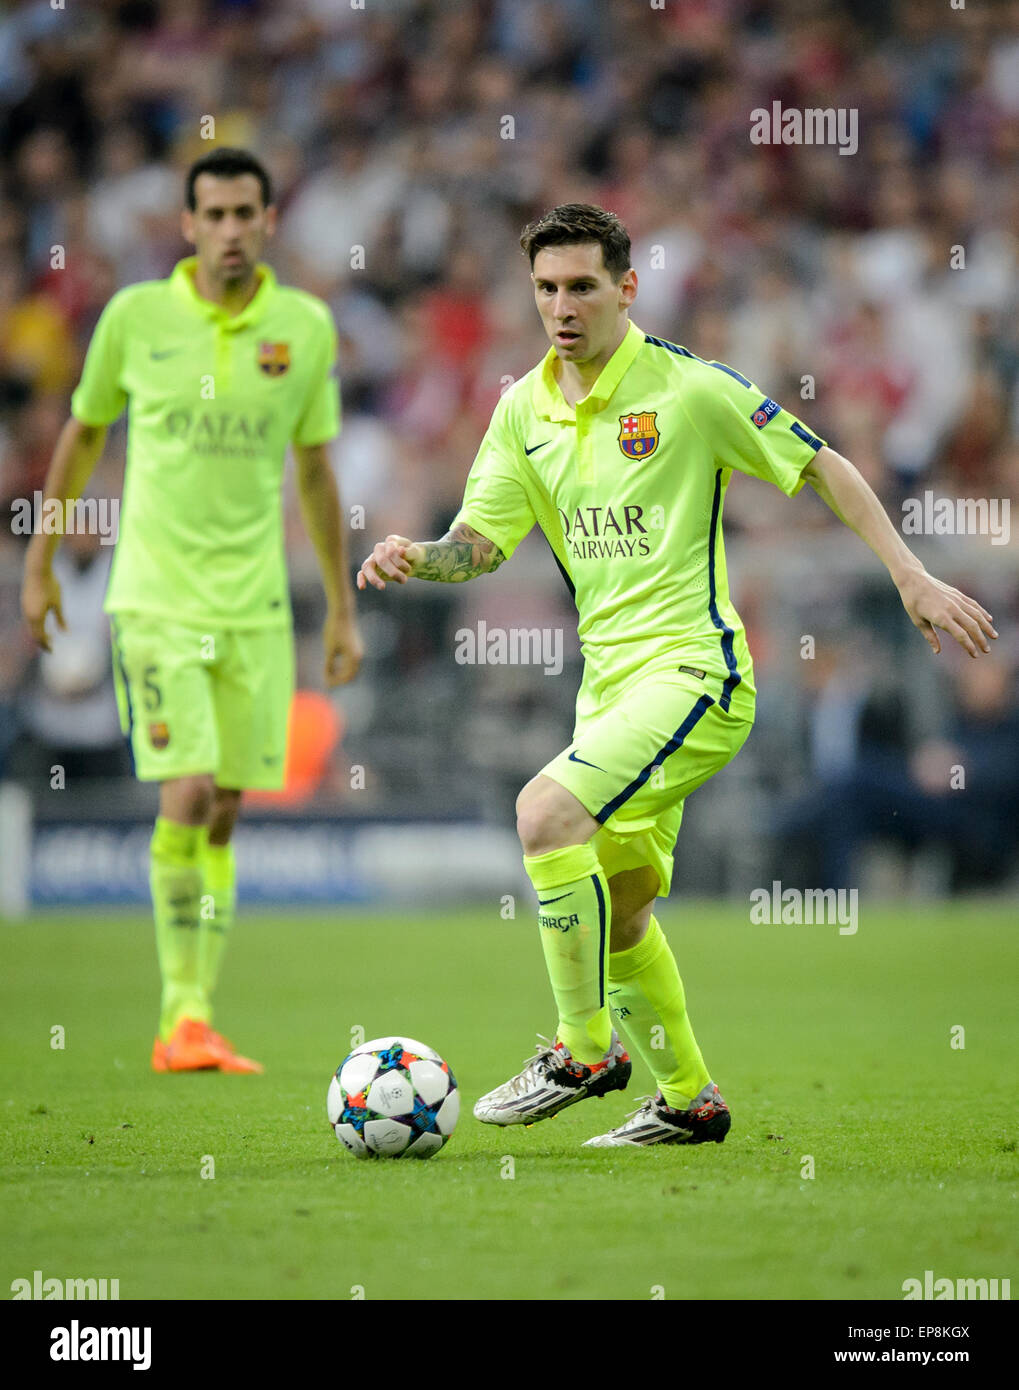 Munich, Germany. 12th May, 2015. Barcelona's Lionel Messi in action during the Champions League semi final match between FC Bayern Munich and FC Barcelona at Allianz Arena in Munich, Germany, 12 May 2015. Photo: Thomas Eisenhuth/dpa - NO WIRE SERVICE -/dpa/Alamy Live News Stock Photo